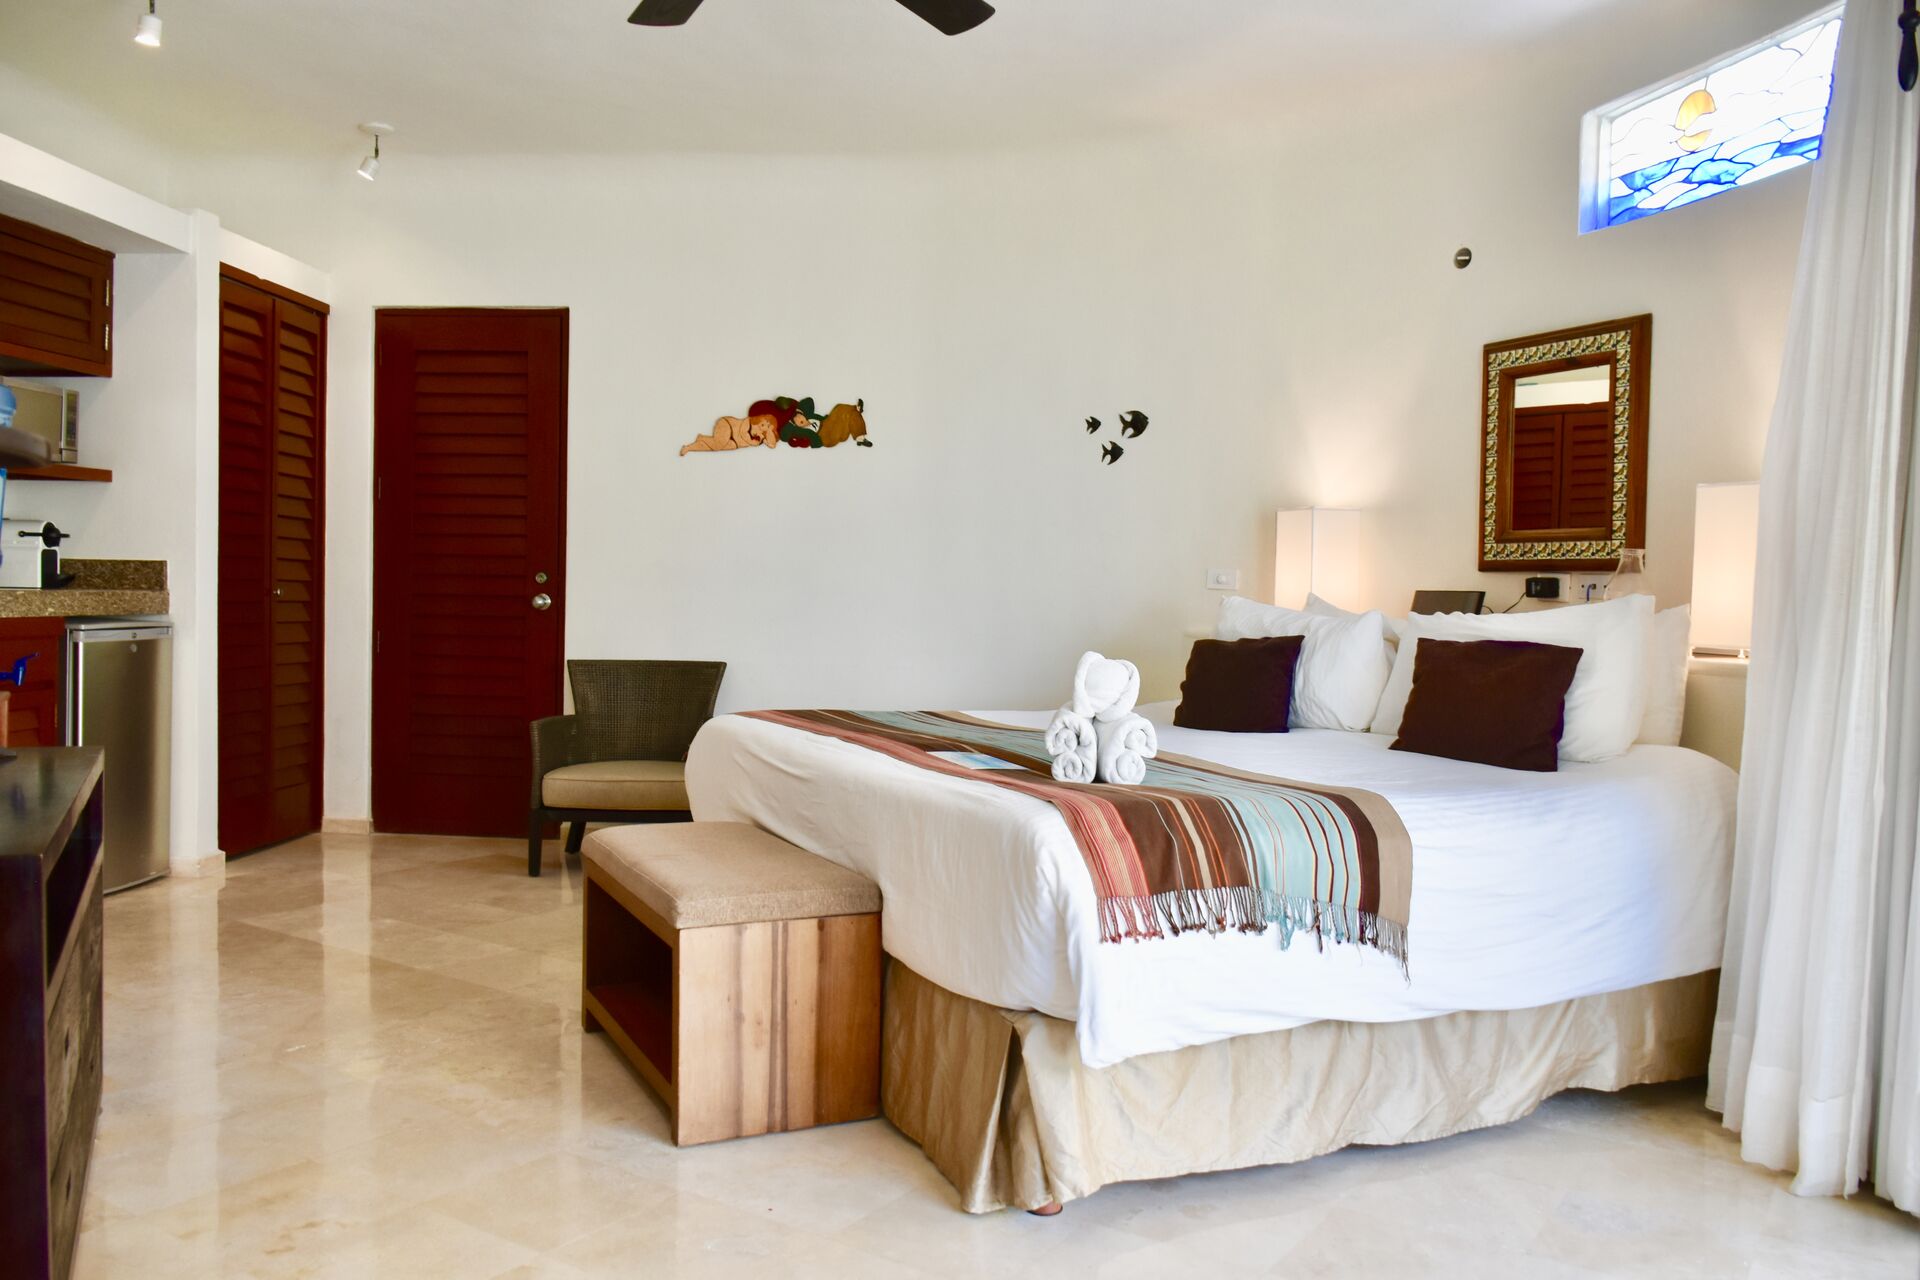 Amazing ocean view suite with king size bed and kitchenette.